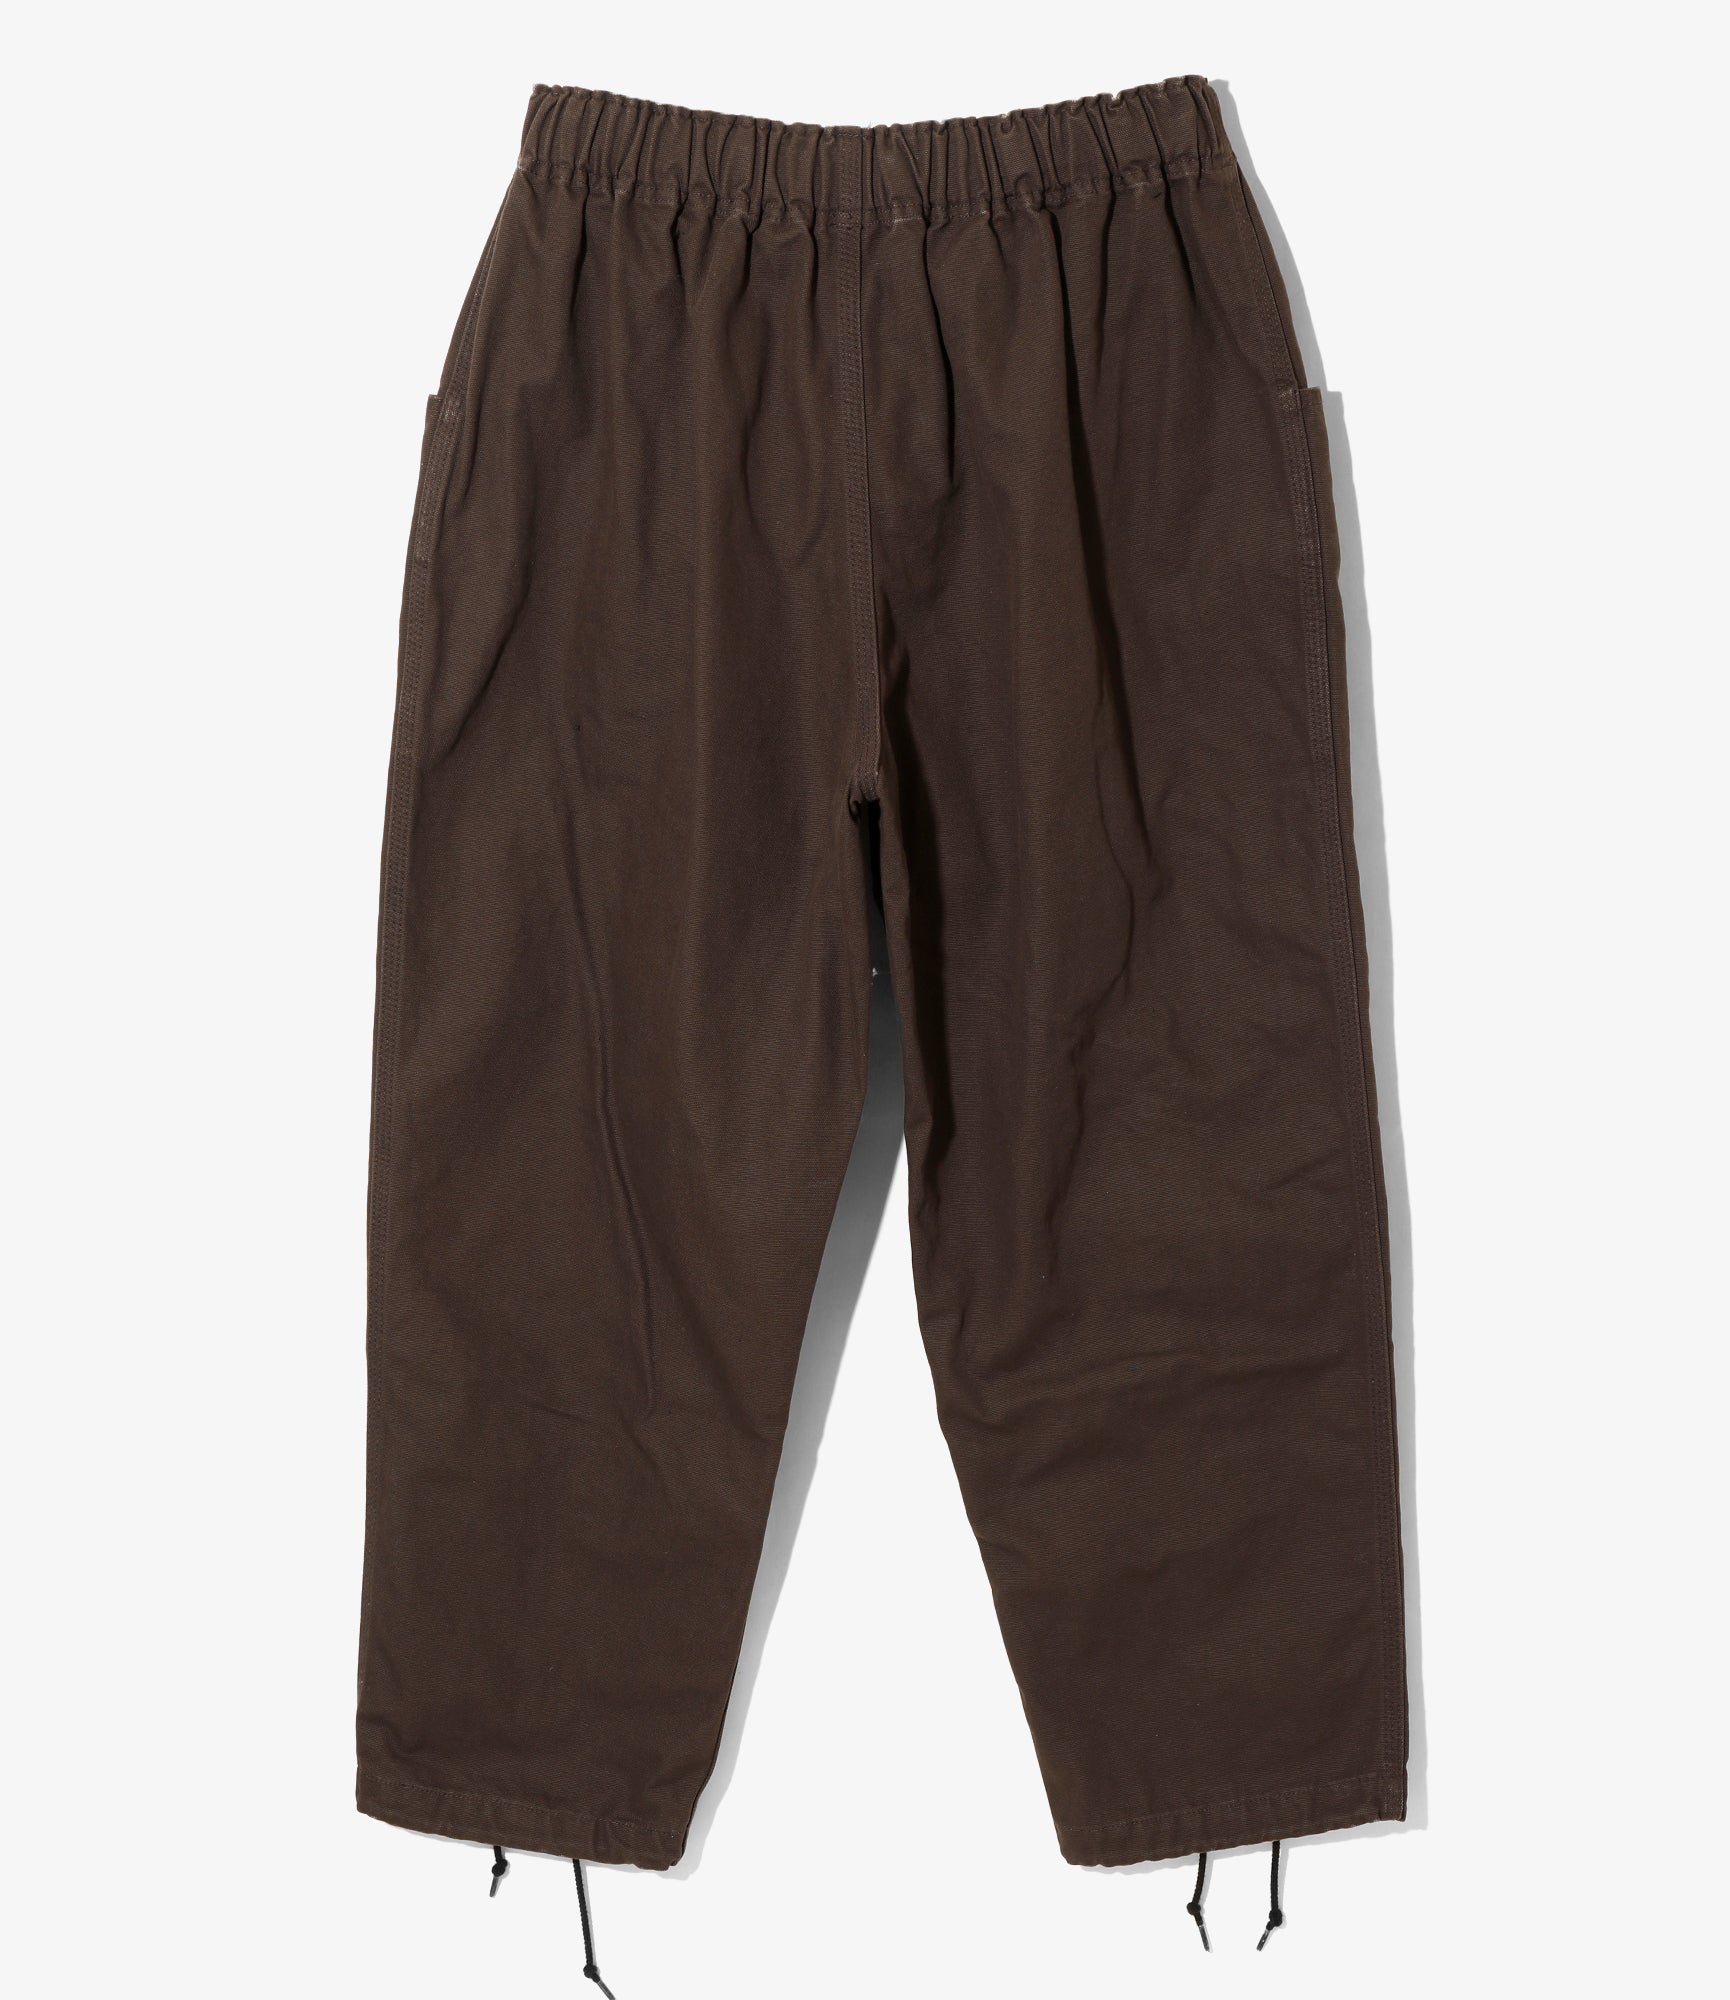 Belted C.S. Pant - Brown - 11.5oz Cotton Canvas